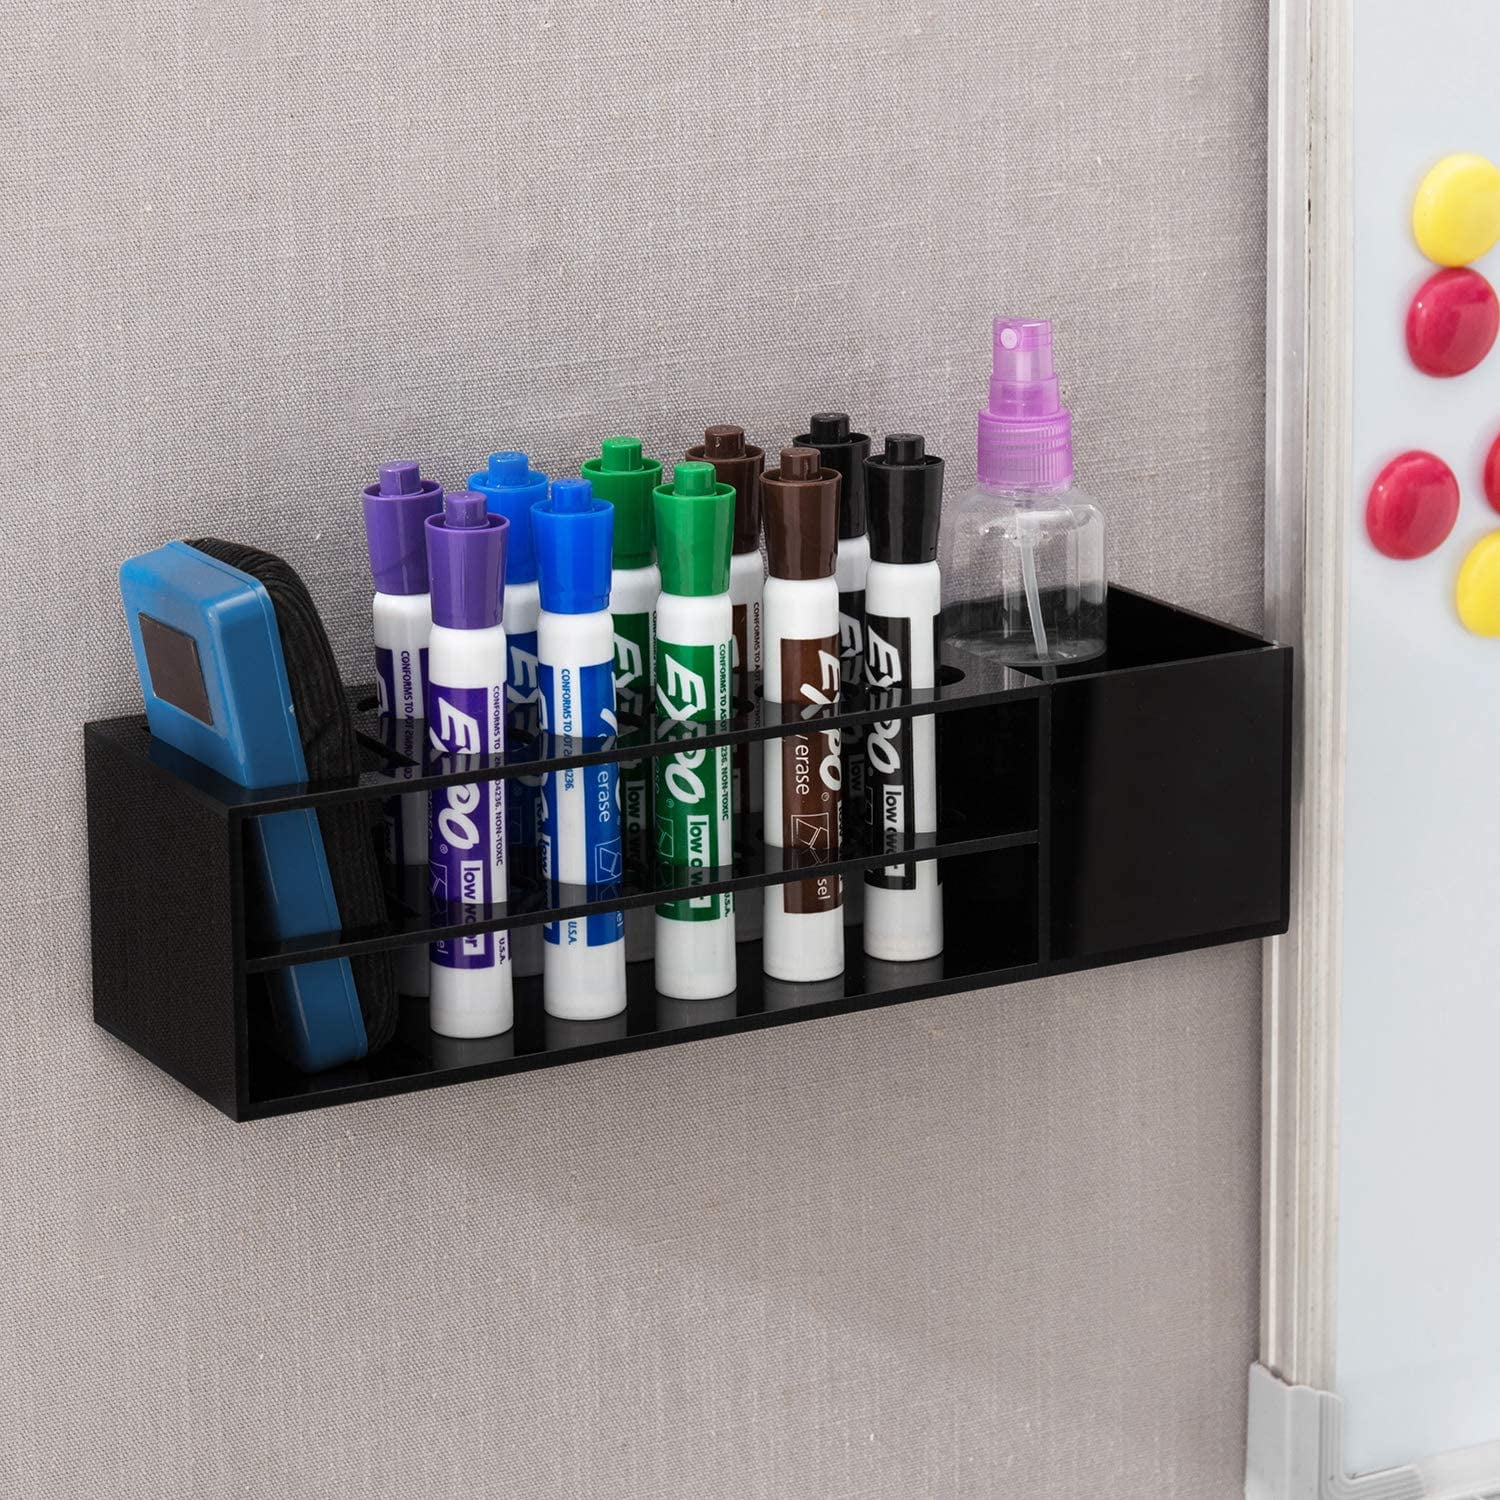 Storage Theory | Dry Erase Board Marker and Eraser Holder | Peel & Stick | No Hardware Required | White Color | Markers & Eraser Not Included